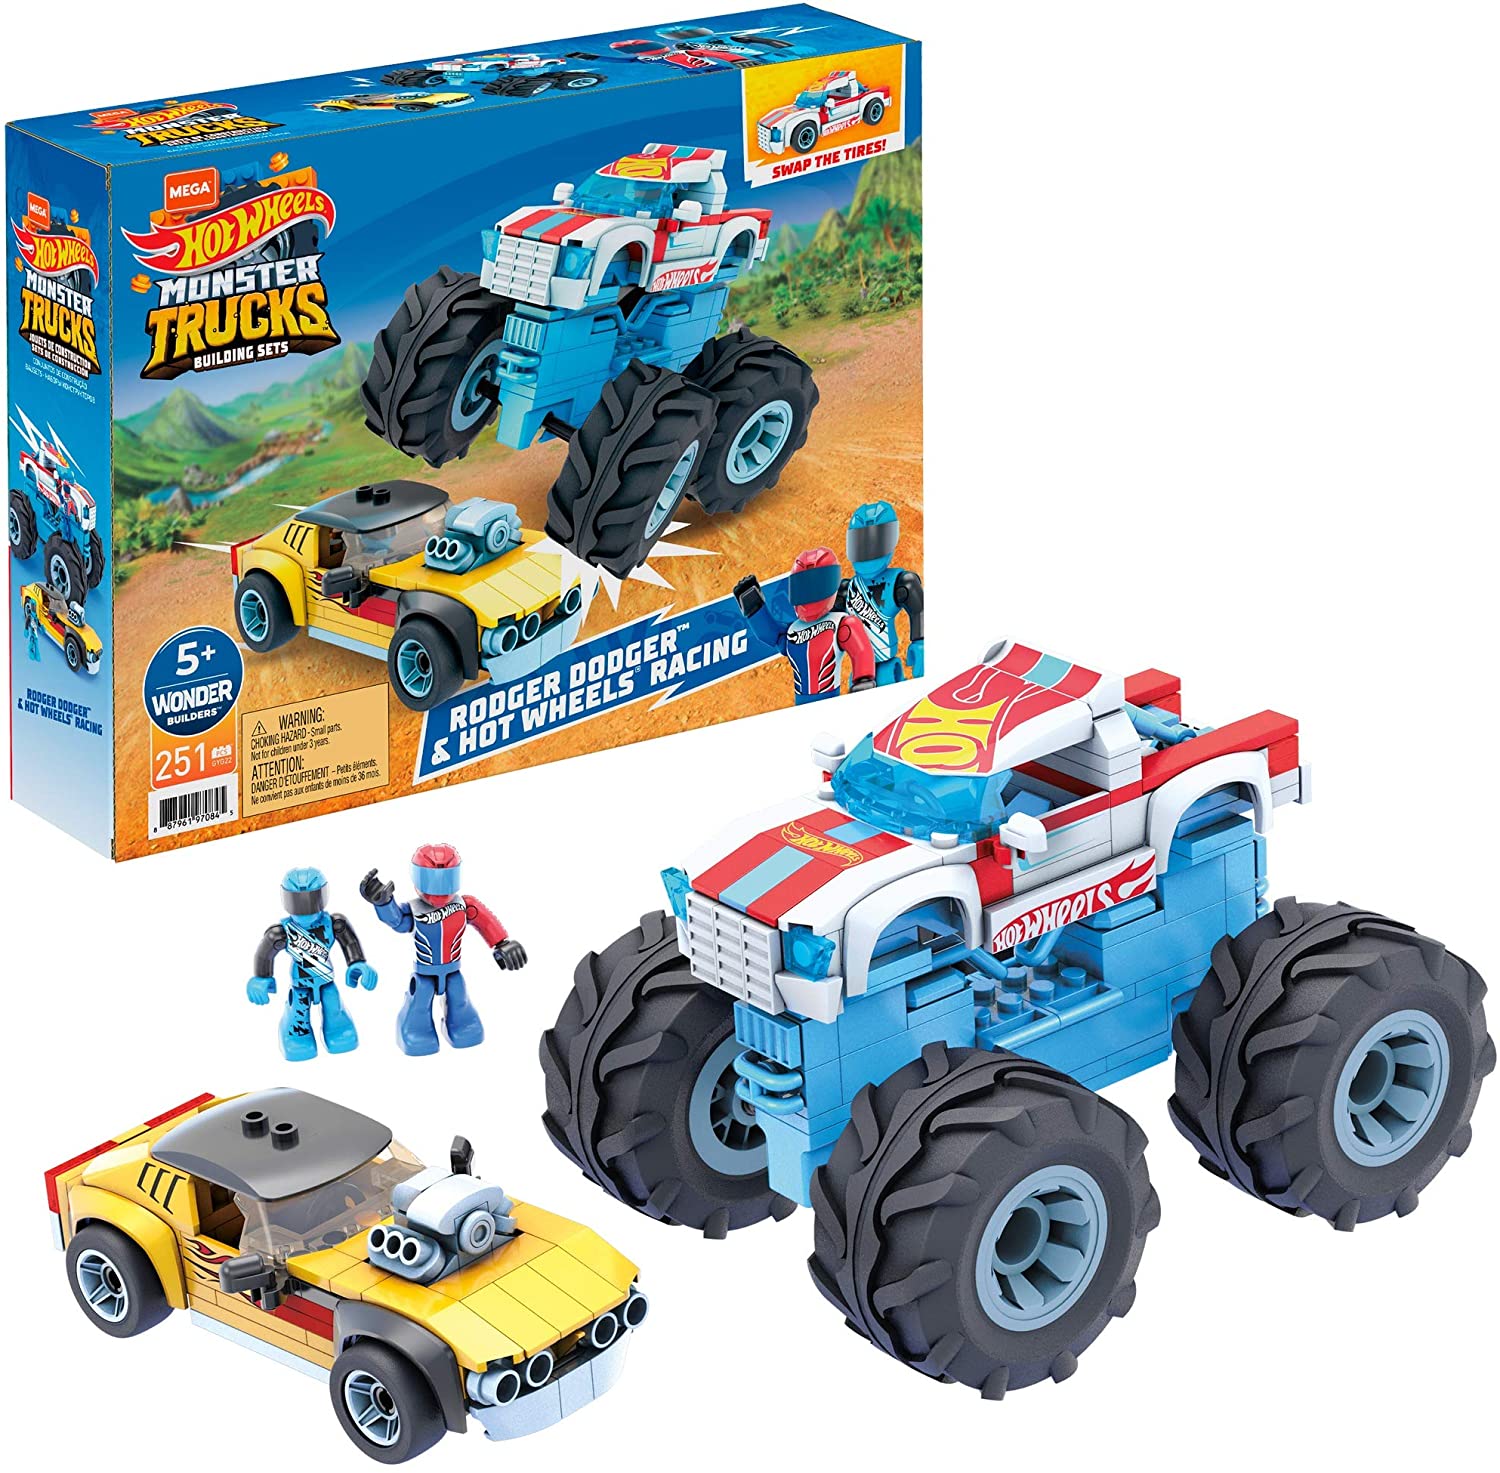 Hot Wheels Mega Construx Rodger Dodger & Hot Wheels Racing Construction Toy Set $12.74 + Free Shipping w/ Prime or Orders $25+